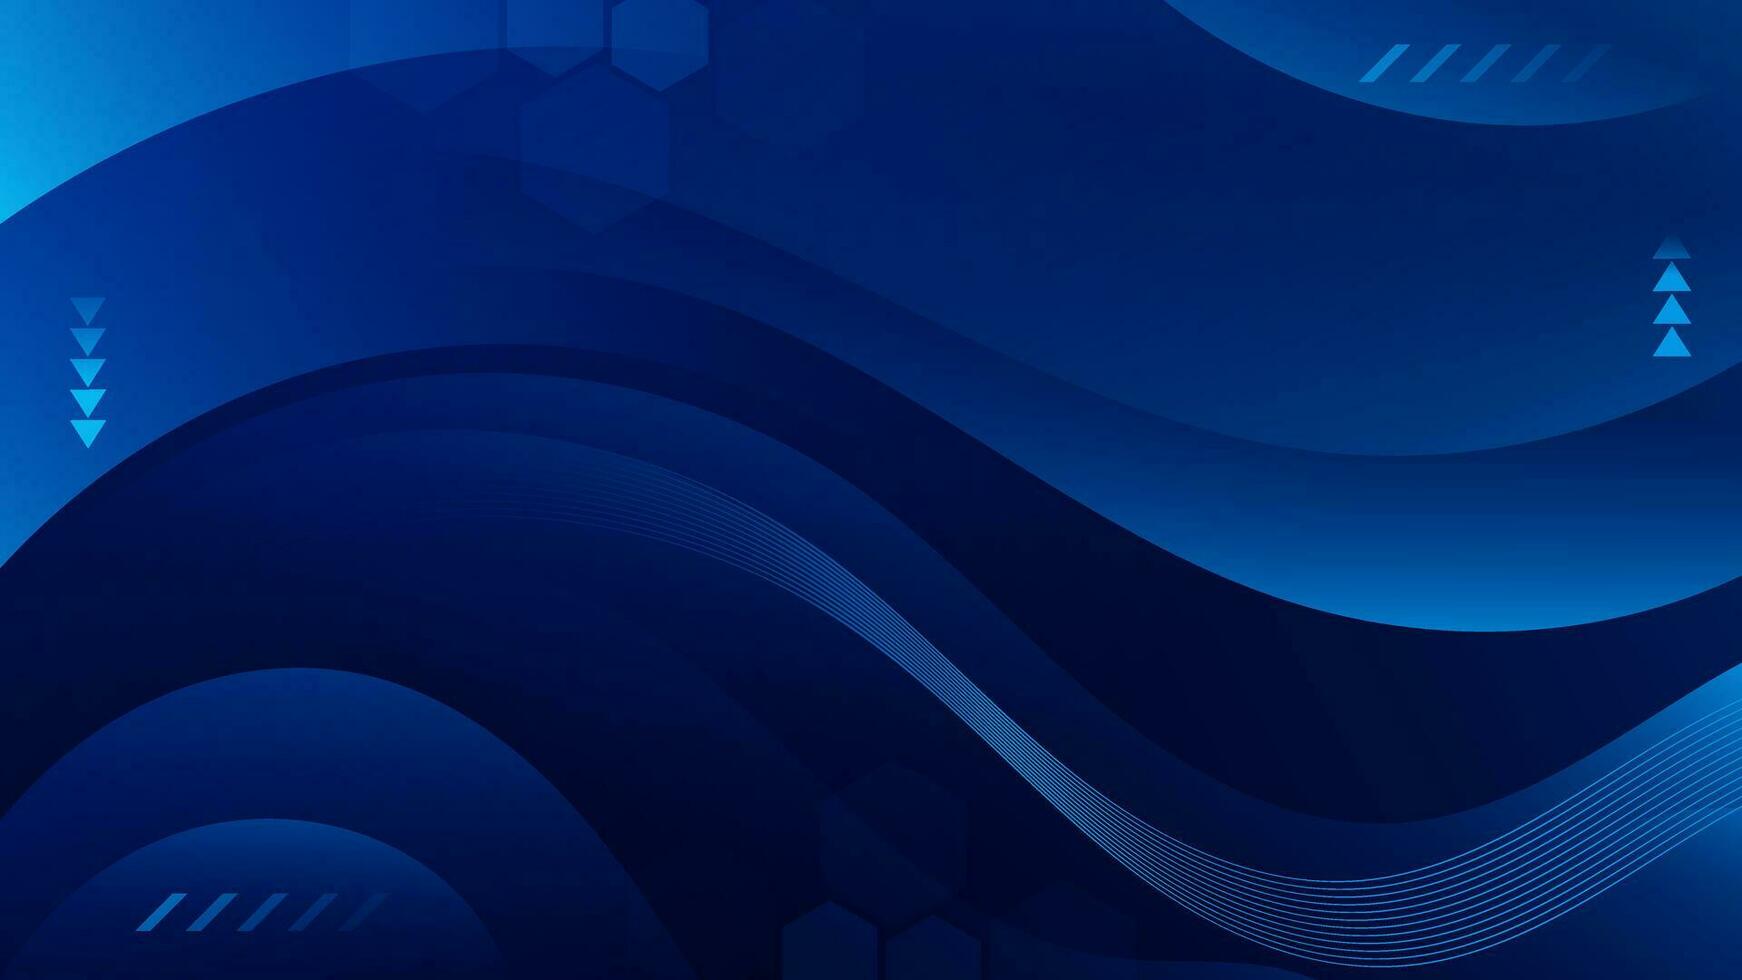 Abstract dark blue Background with Wavy Shapes. flowing and curvy shapes. This asset is suitable for website backgrounds, flyers, posters, and digital art projects. vector